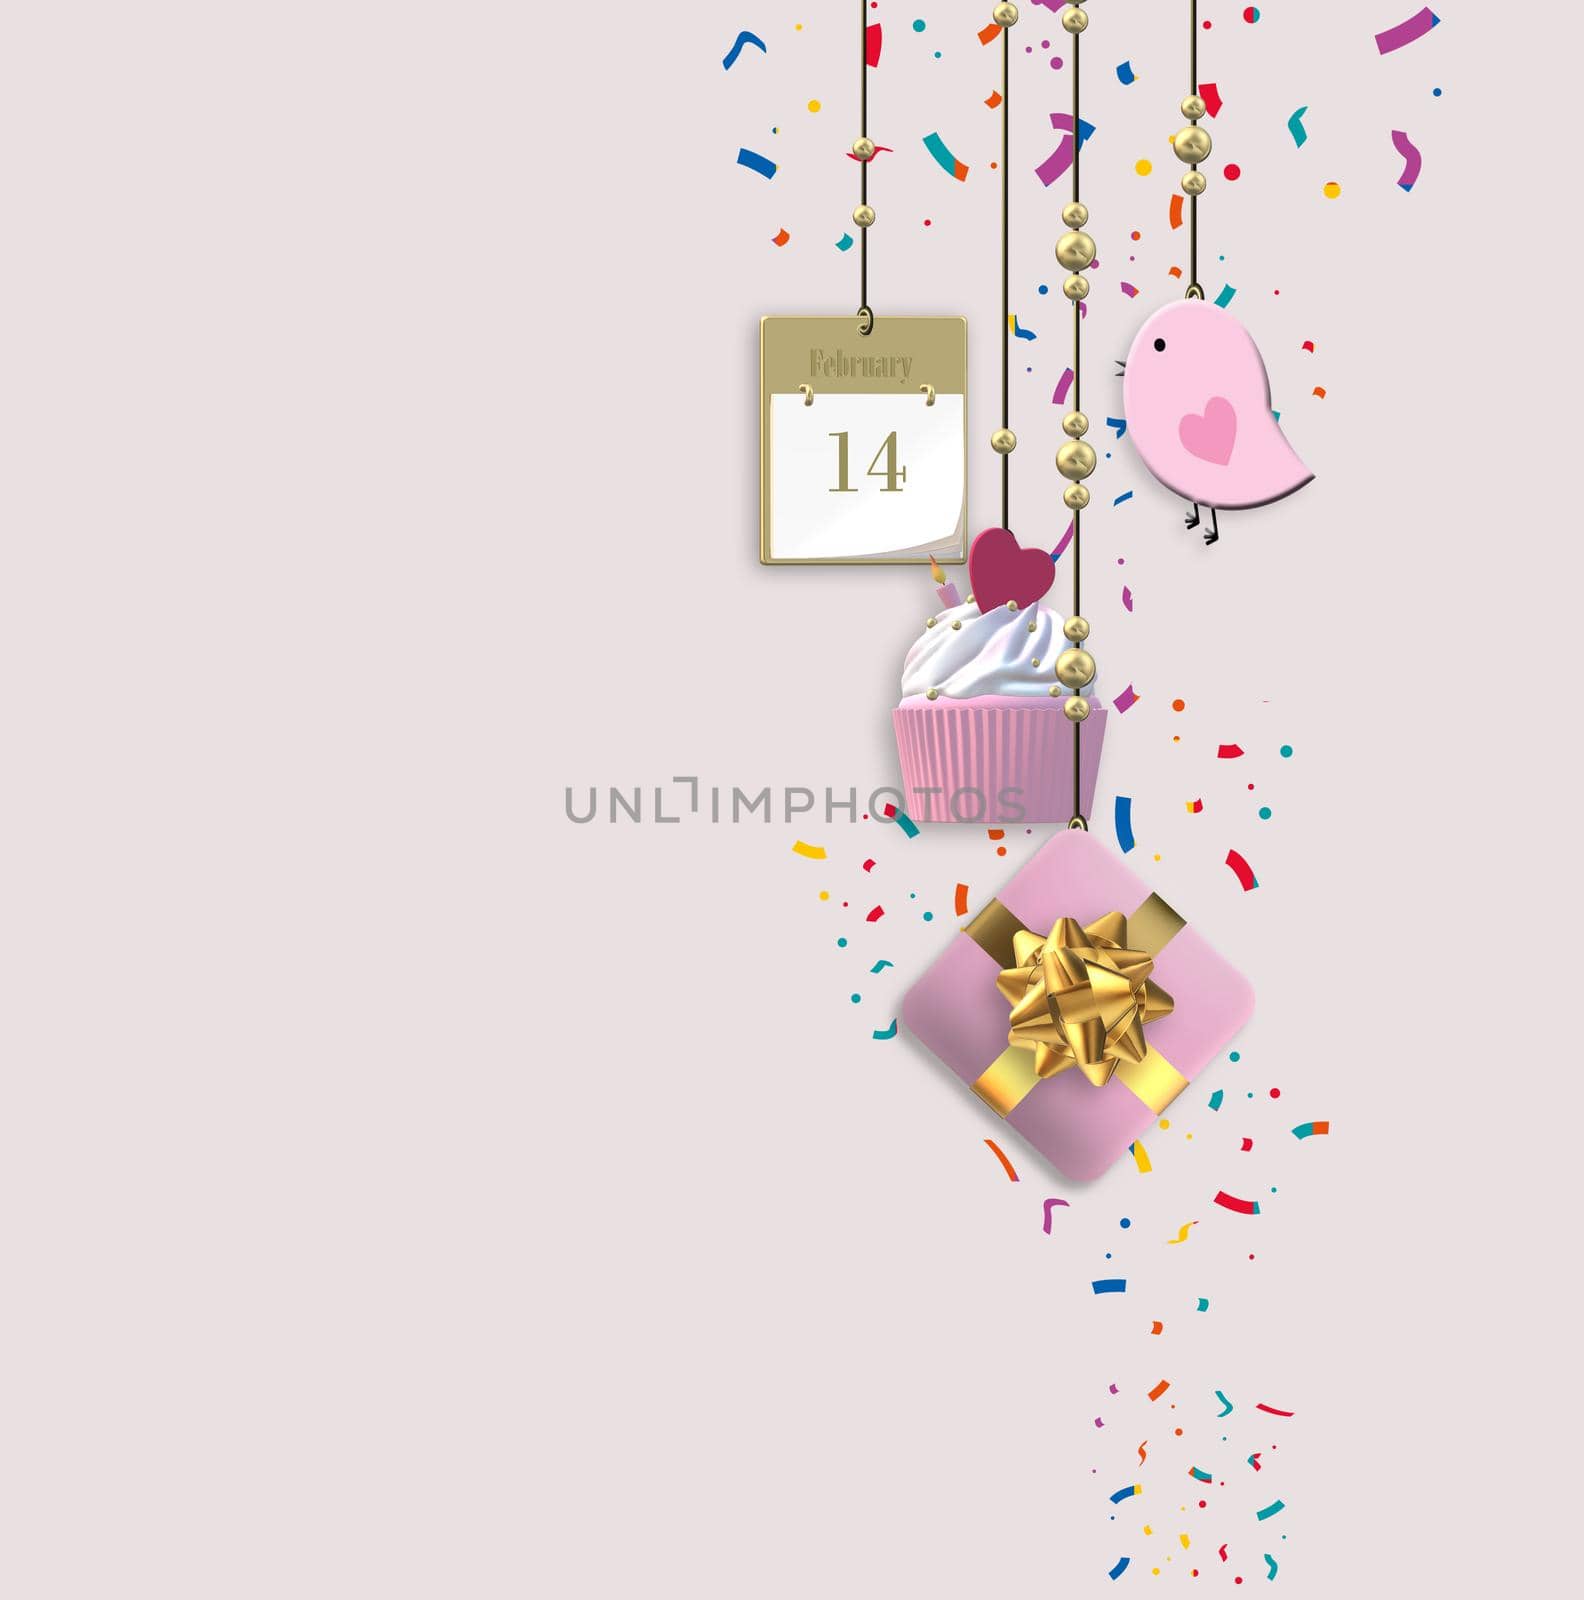 Cute Valentine's card. Hanging heart, gift box, cup cake on pink background. Love, wedding, birthday, Valentin's card. 3D illustration